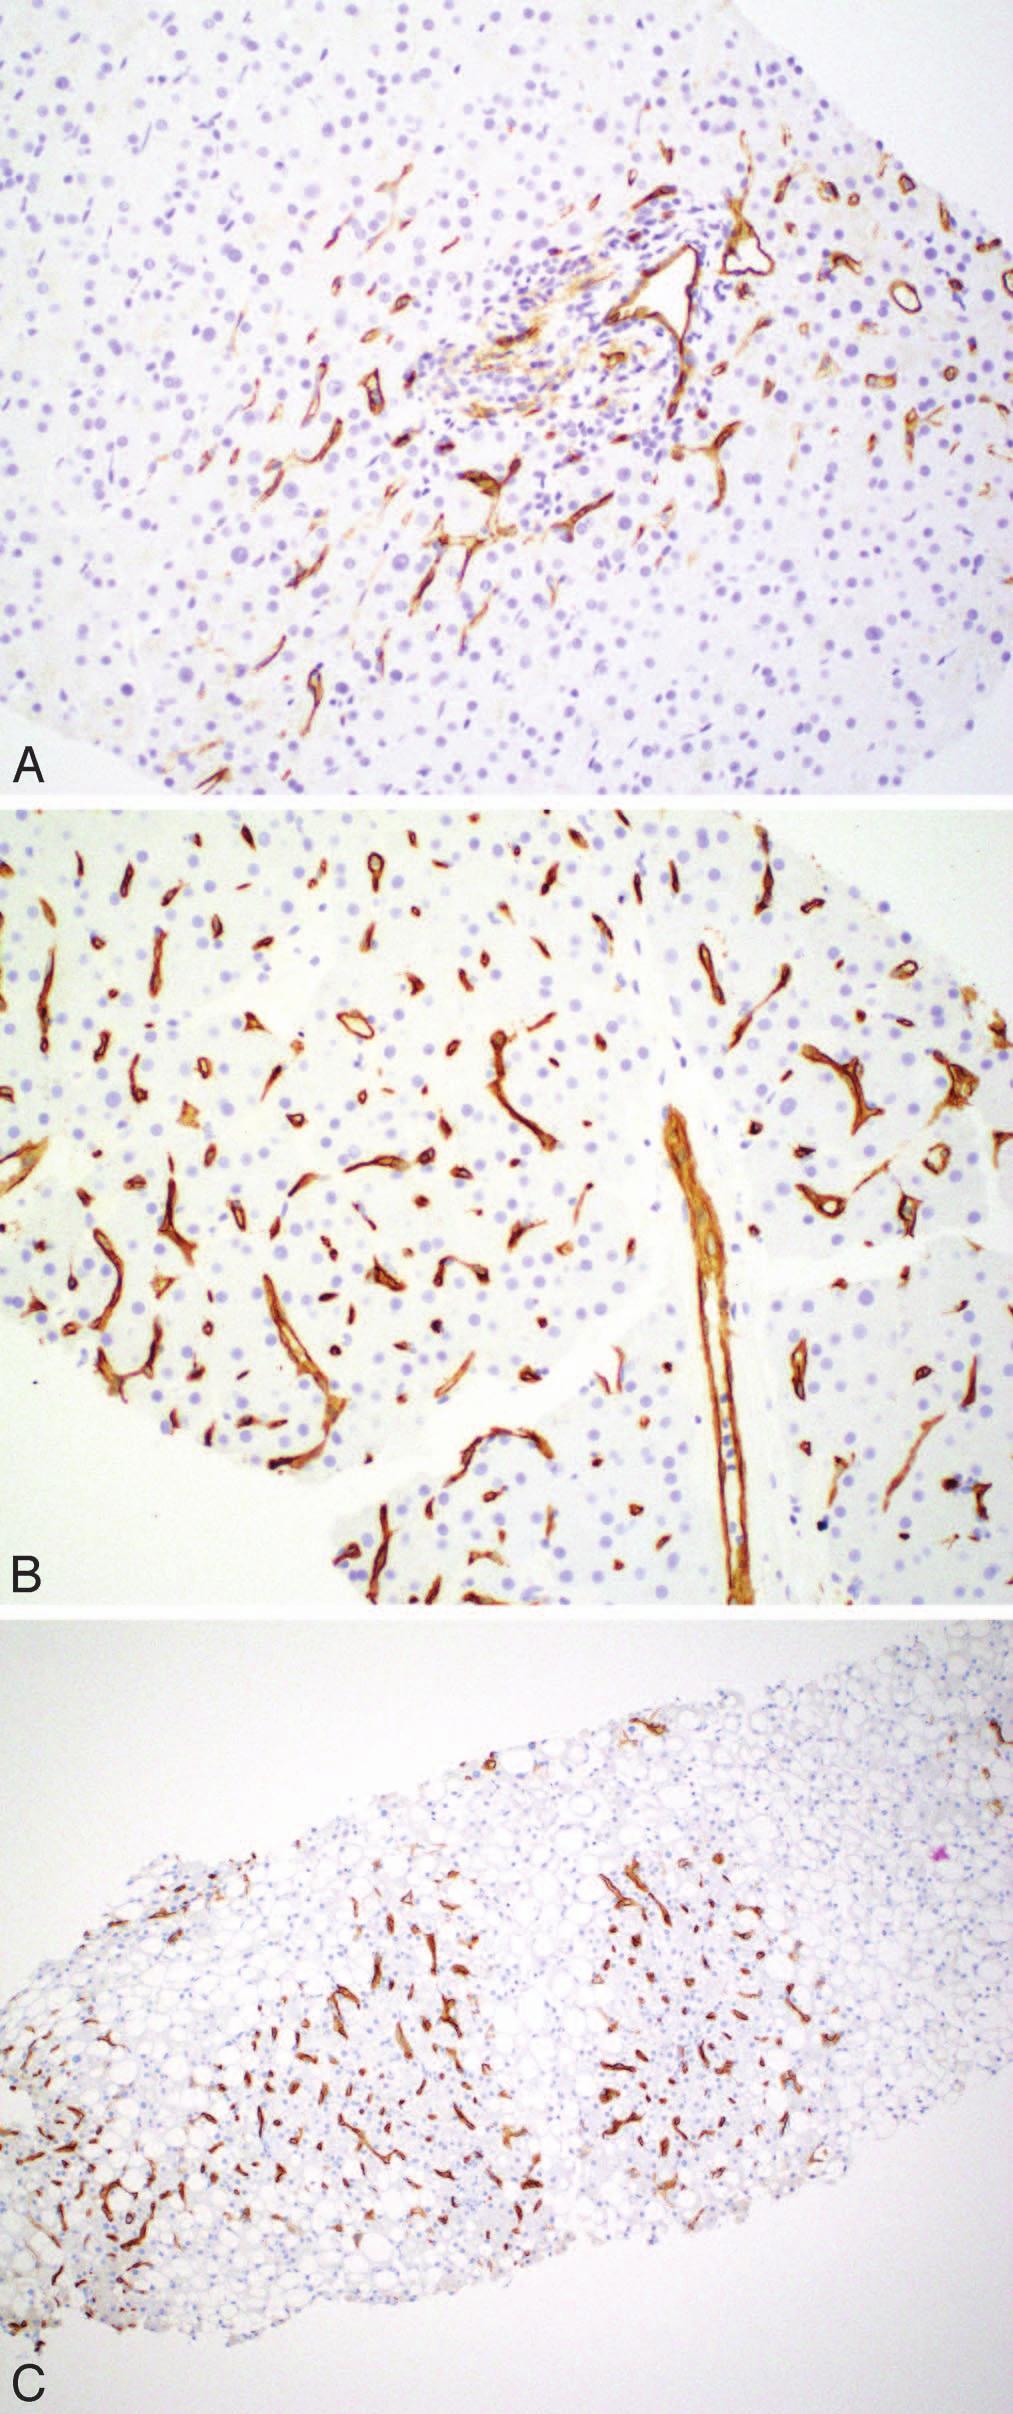 Figure 9. Clusterin shows an enhanced canalicular staining pattern in a hepatocellular carcinoma (A) but a delicate, granular canalicular pattern in adjacent nonneoplastic (cirrhotic) liver (B).